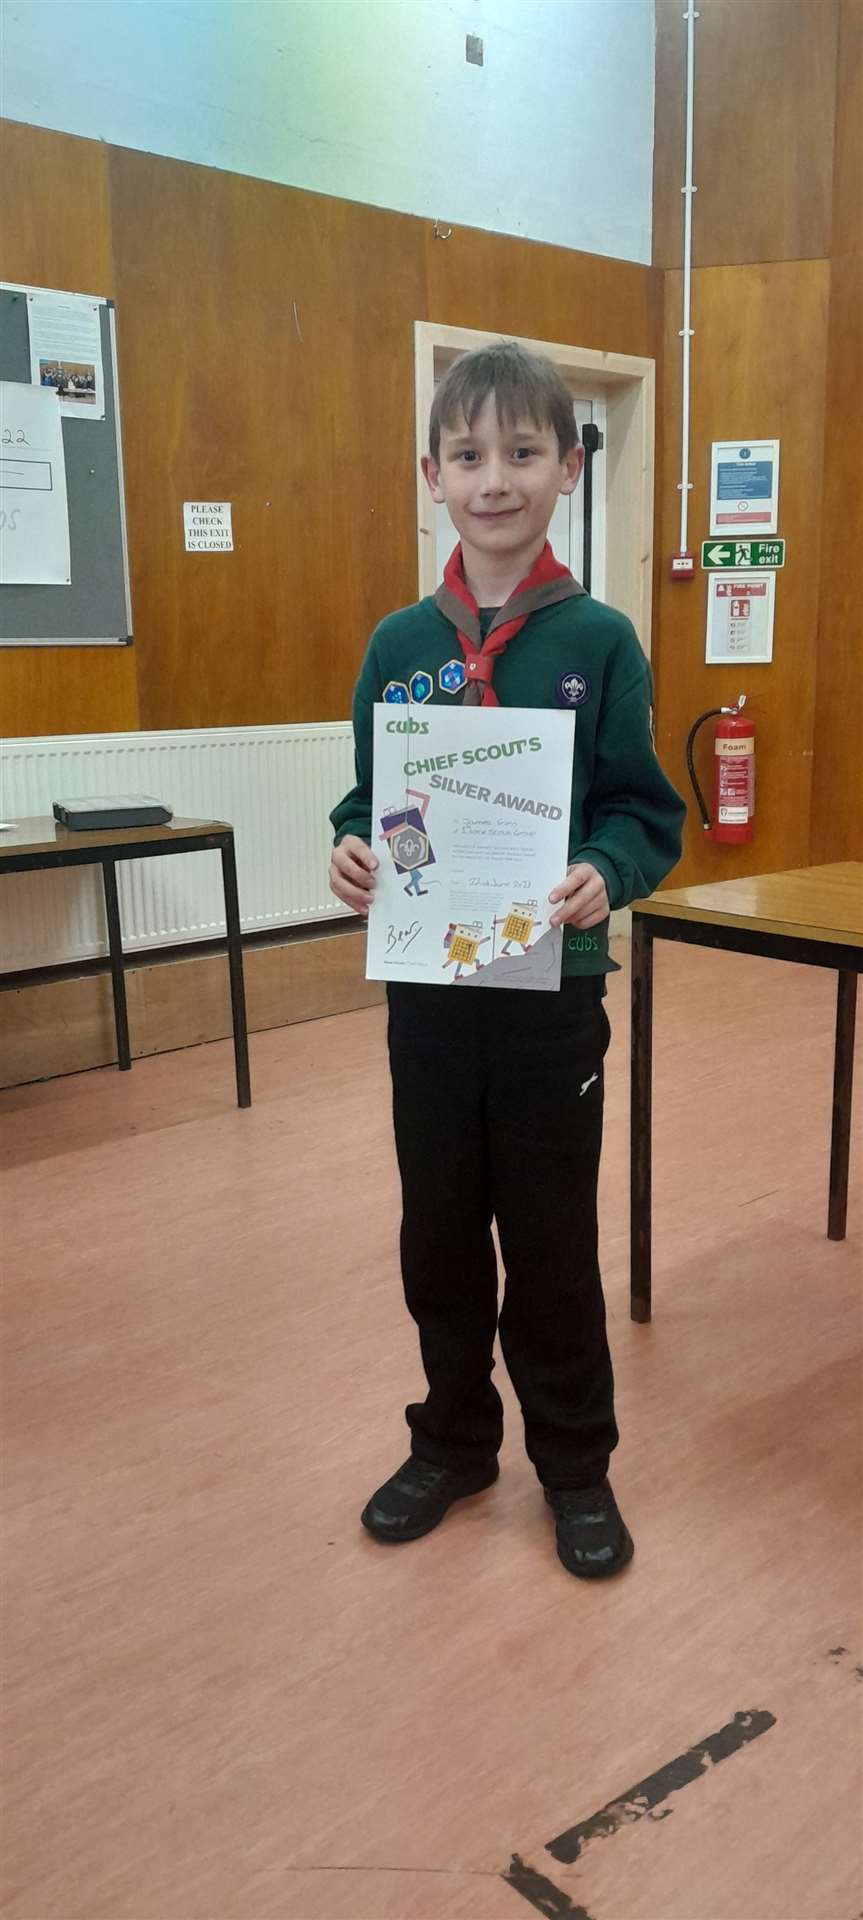 James Gunn of 1st Wick Cub Scouts with his Chief Scout Silver Award certificate.